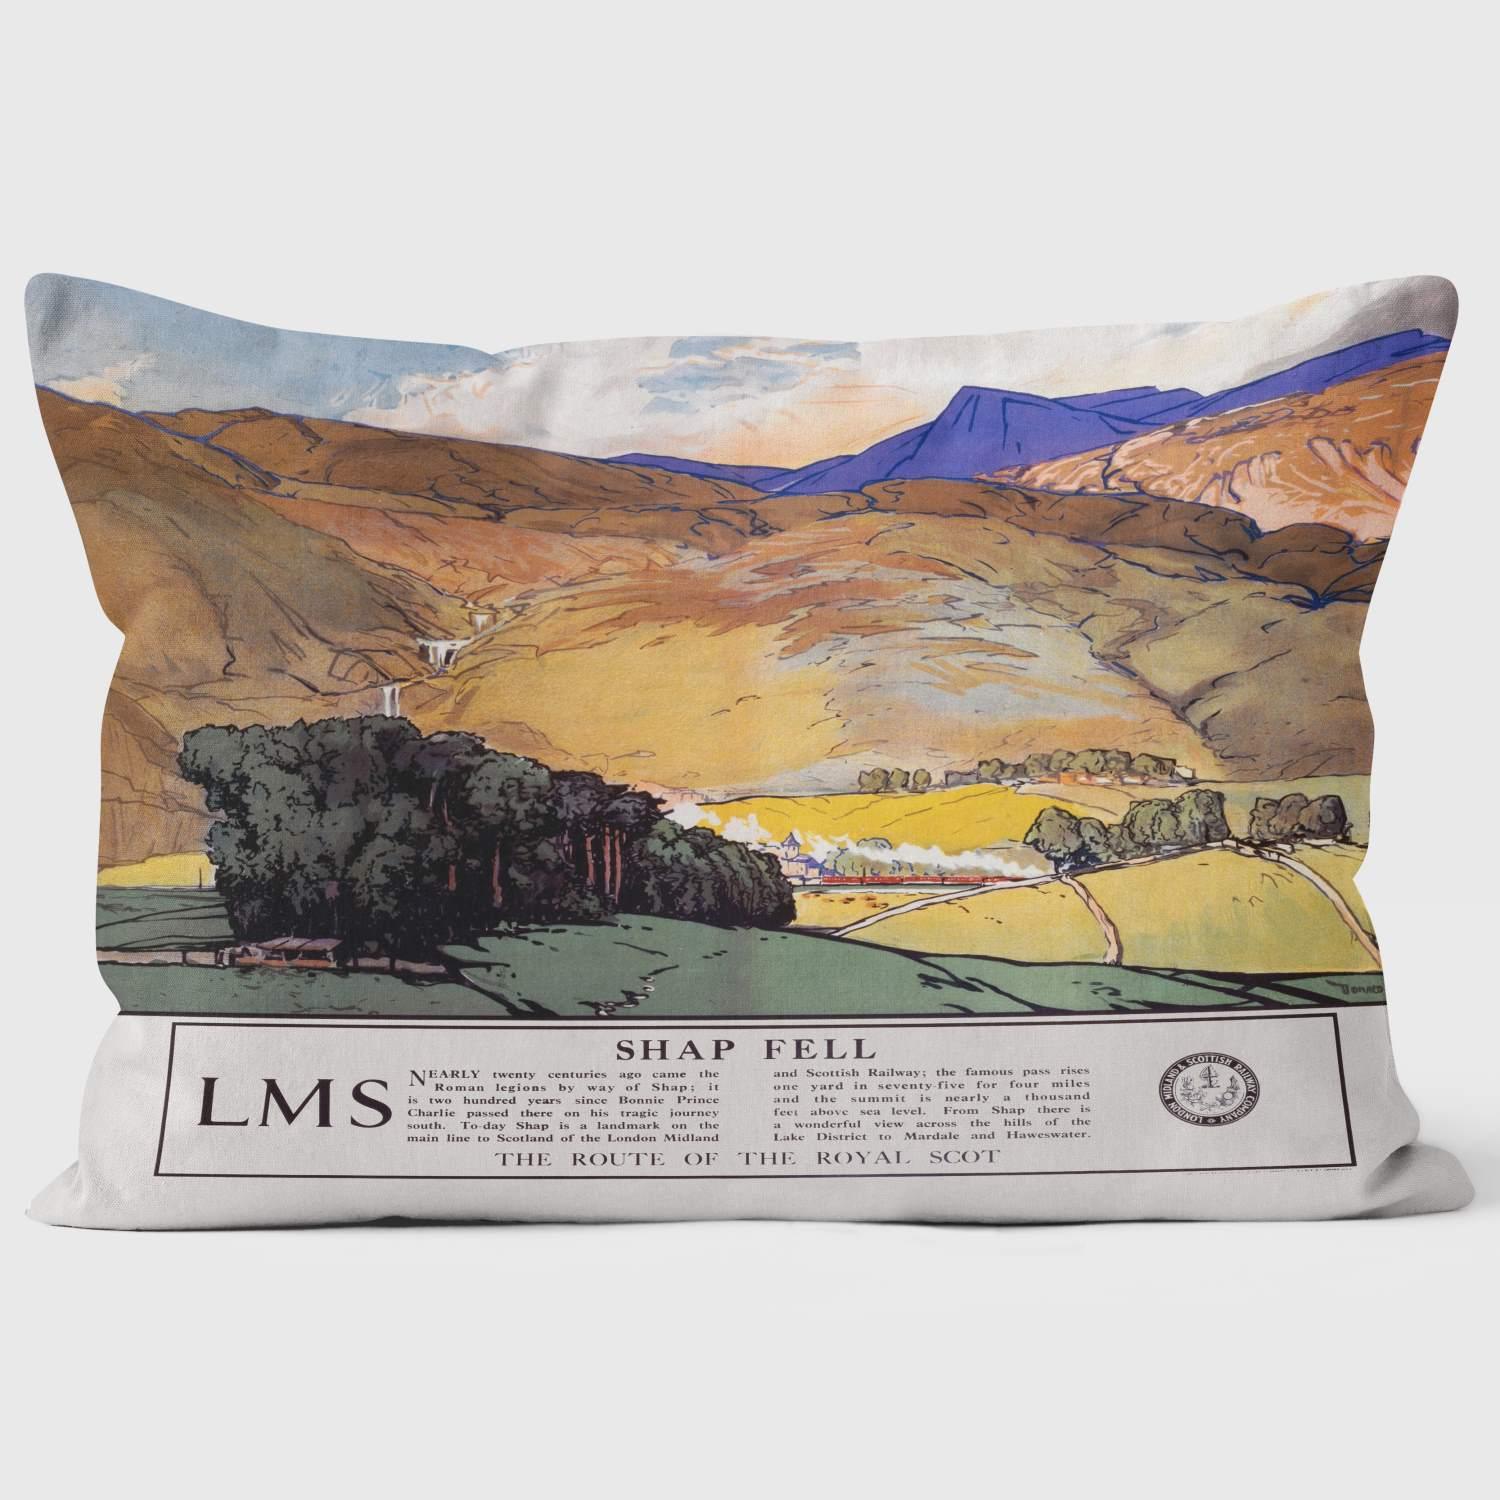 Shap Fell - The Route of the Royal Scot' LMS 1925 - National Railway Museum Cushion - Handmade Cushions UK - WeLoveCushions